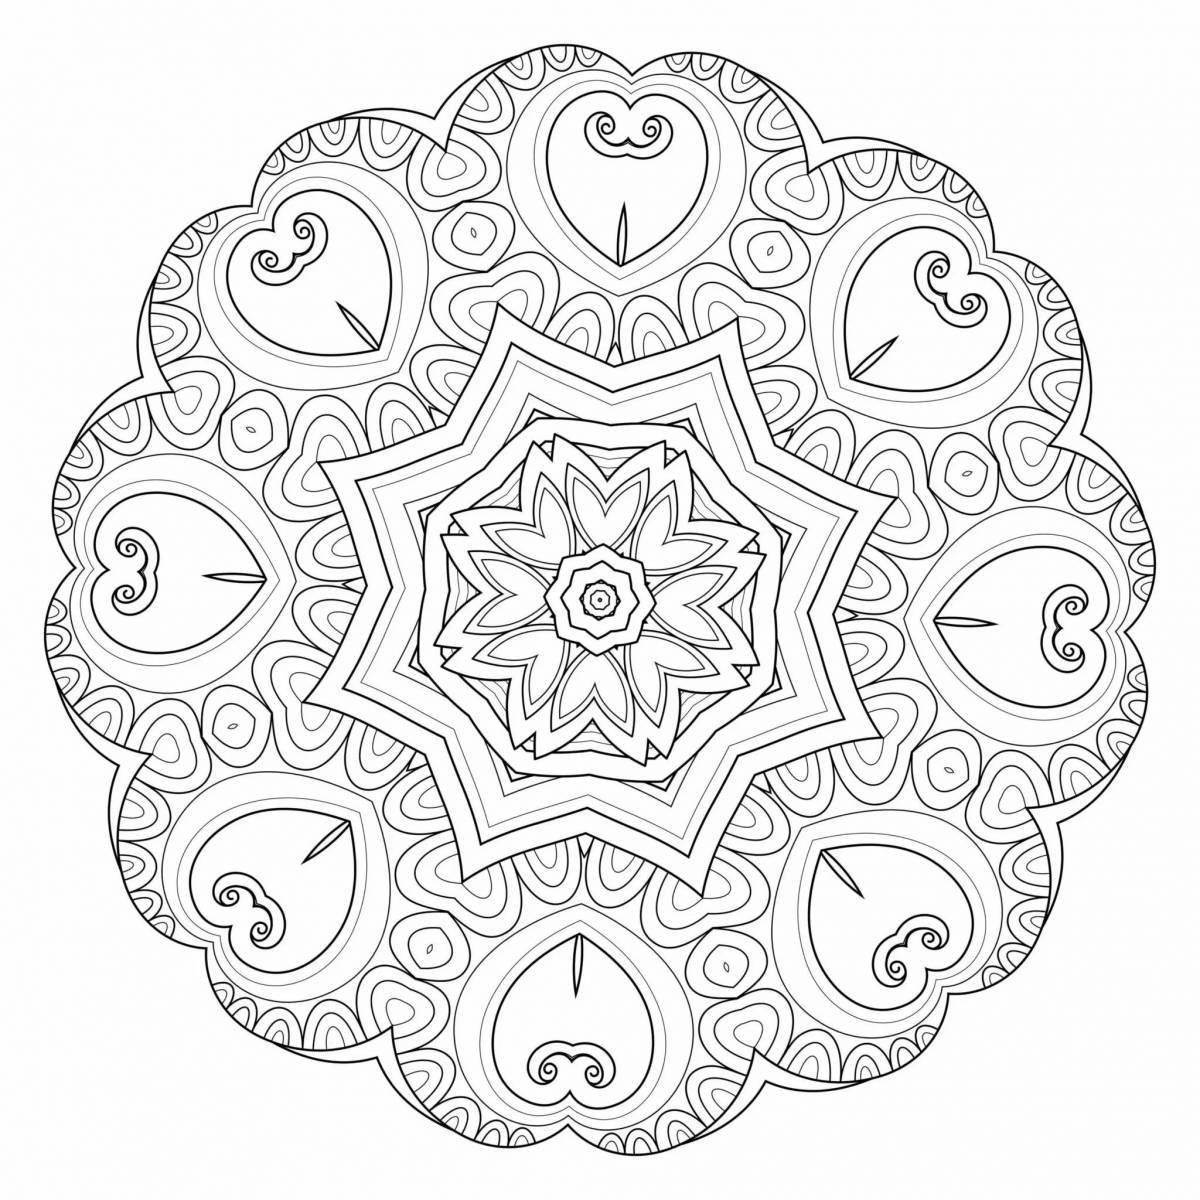 Mandala for good luck and success in everything #7